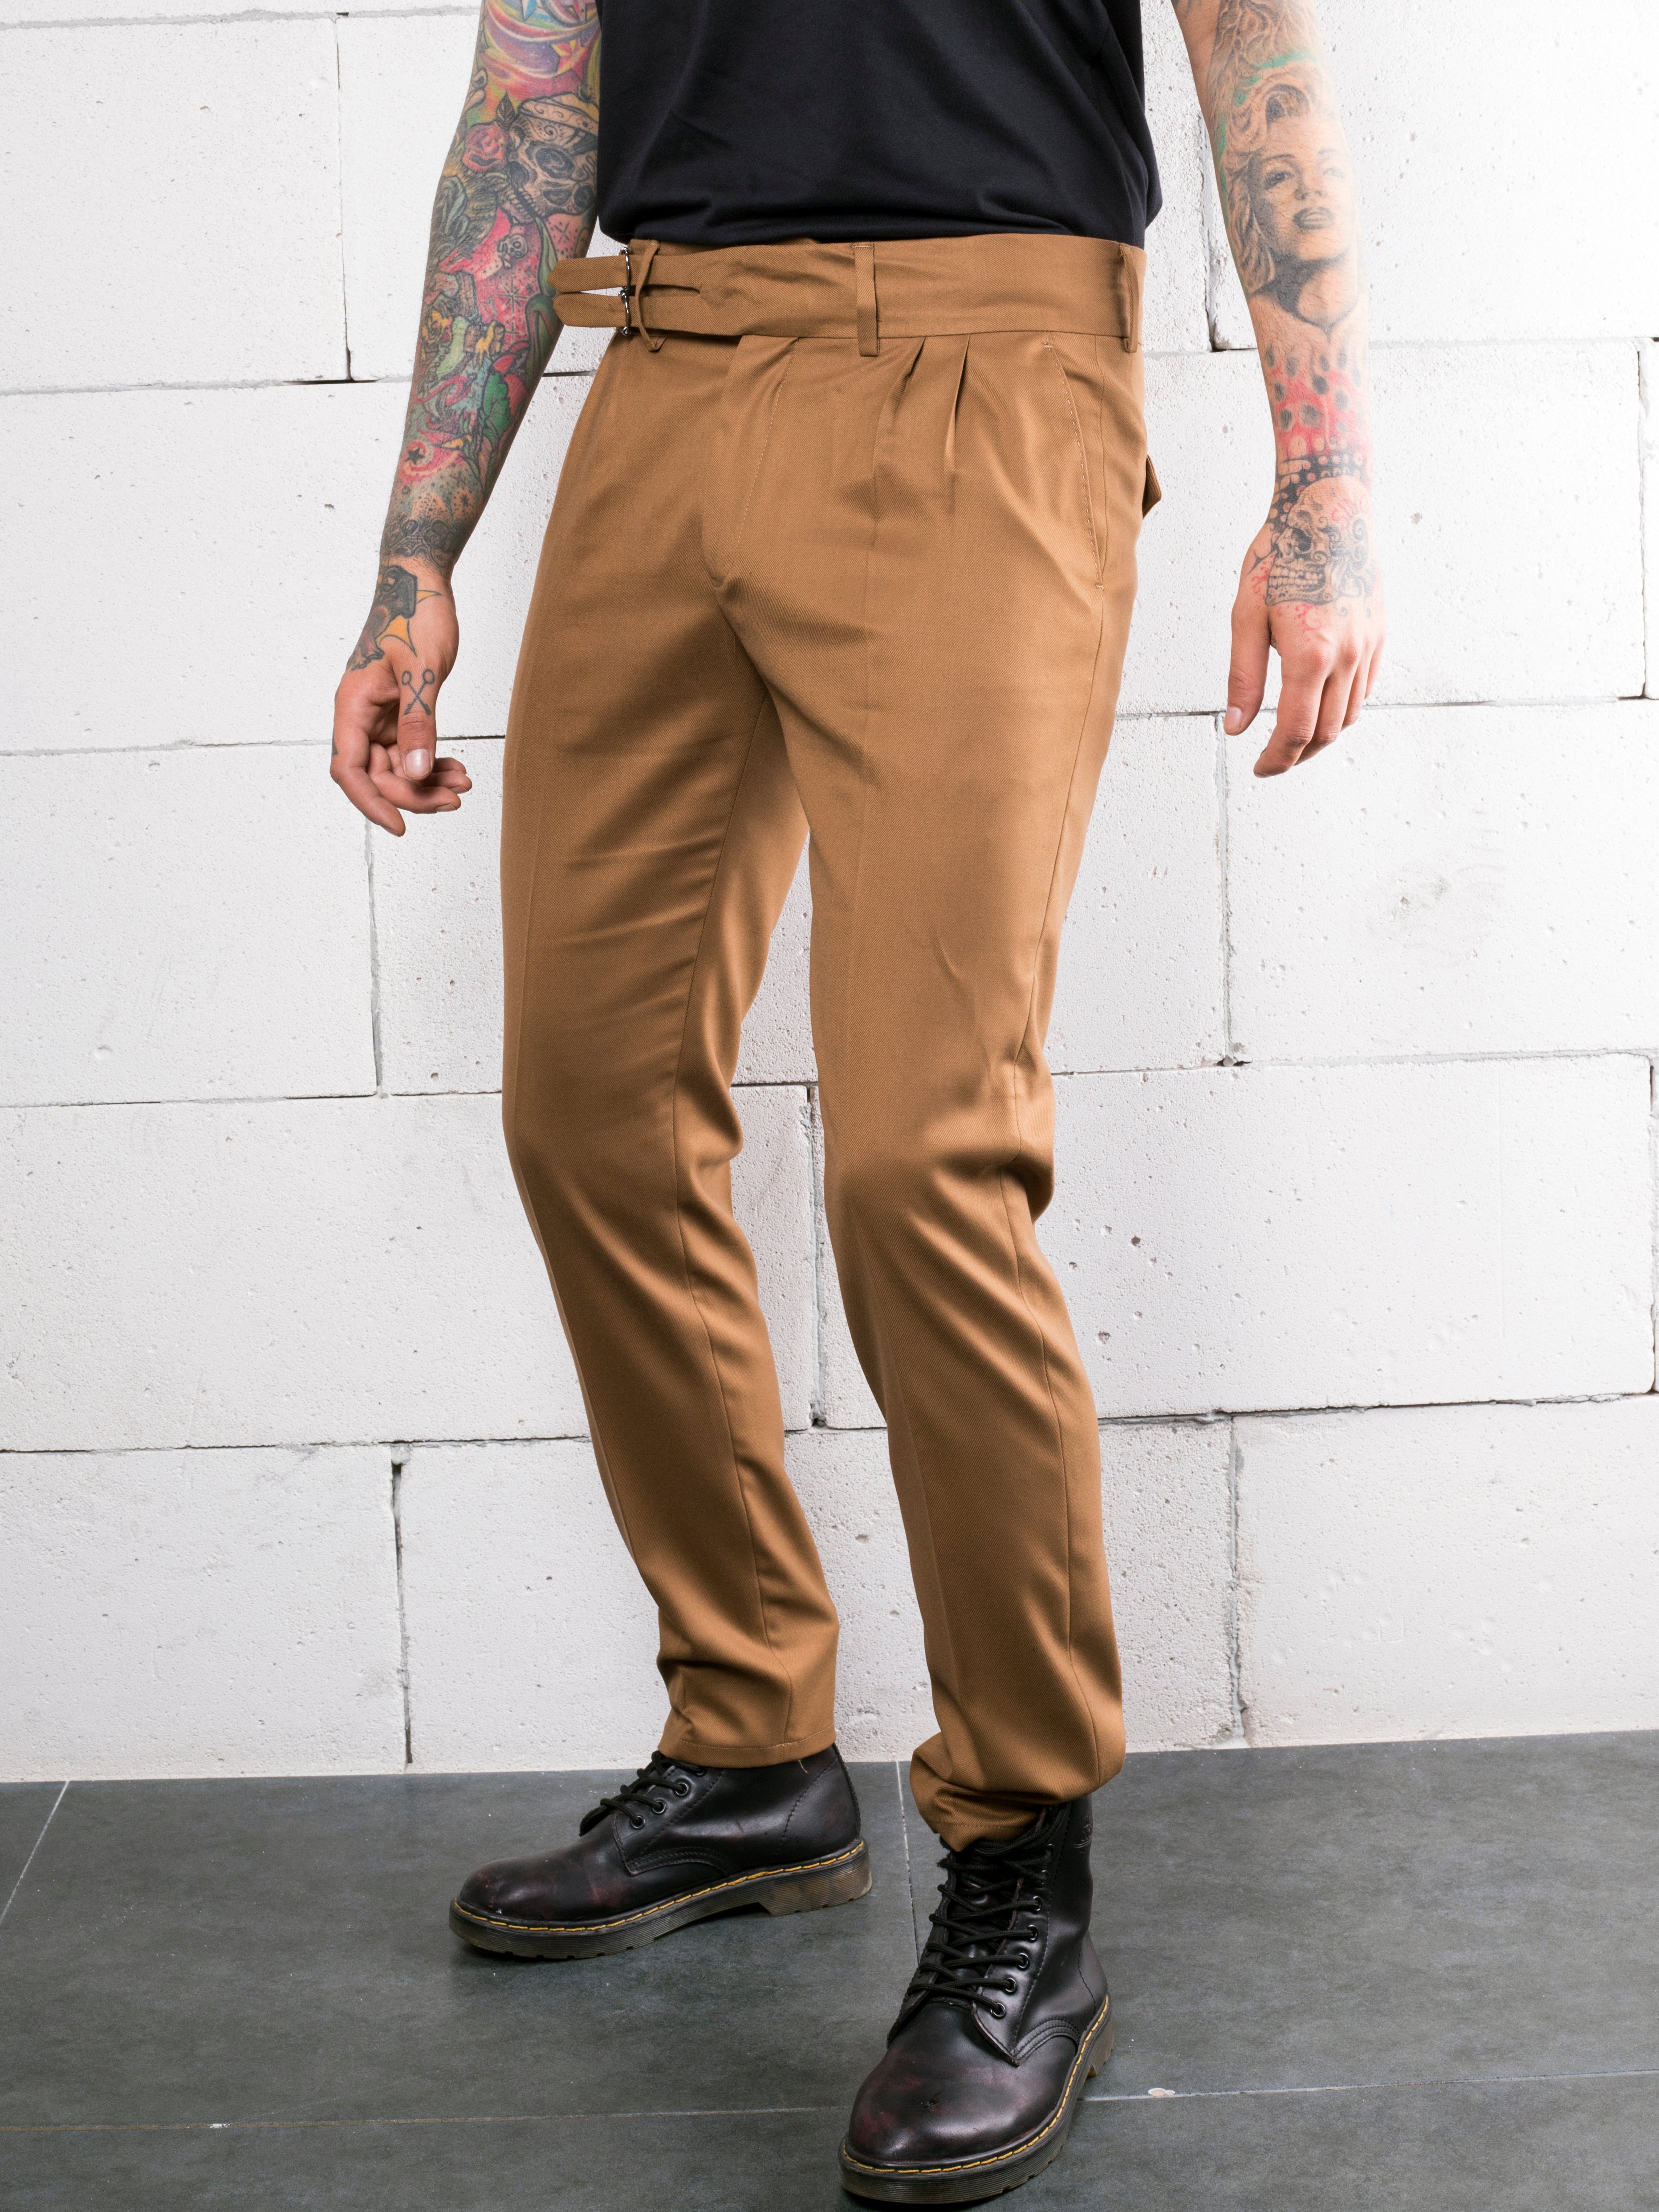 A man with tattoos wearing tan chino pants made of CROISSANT fabric.